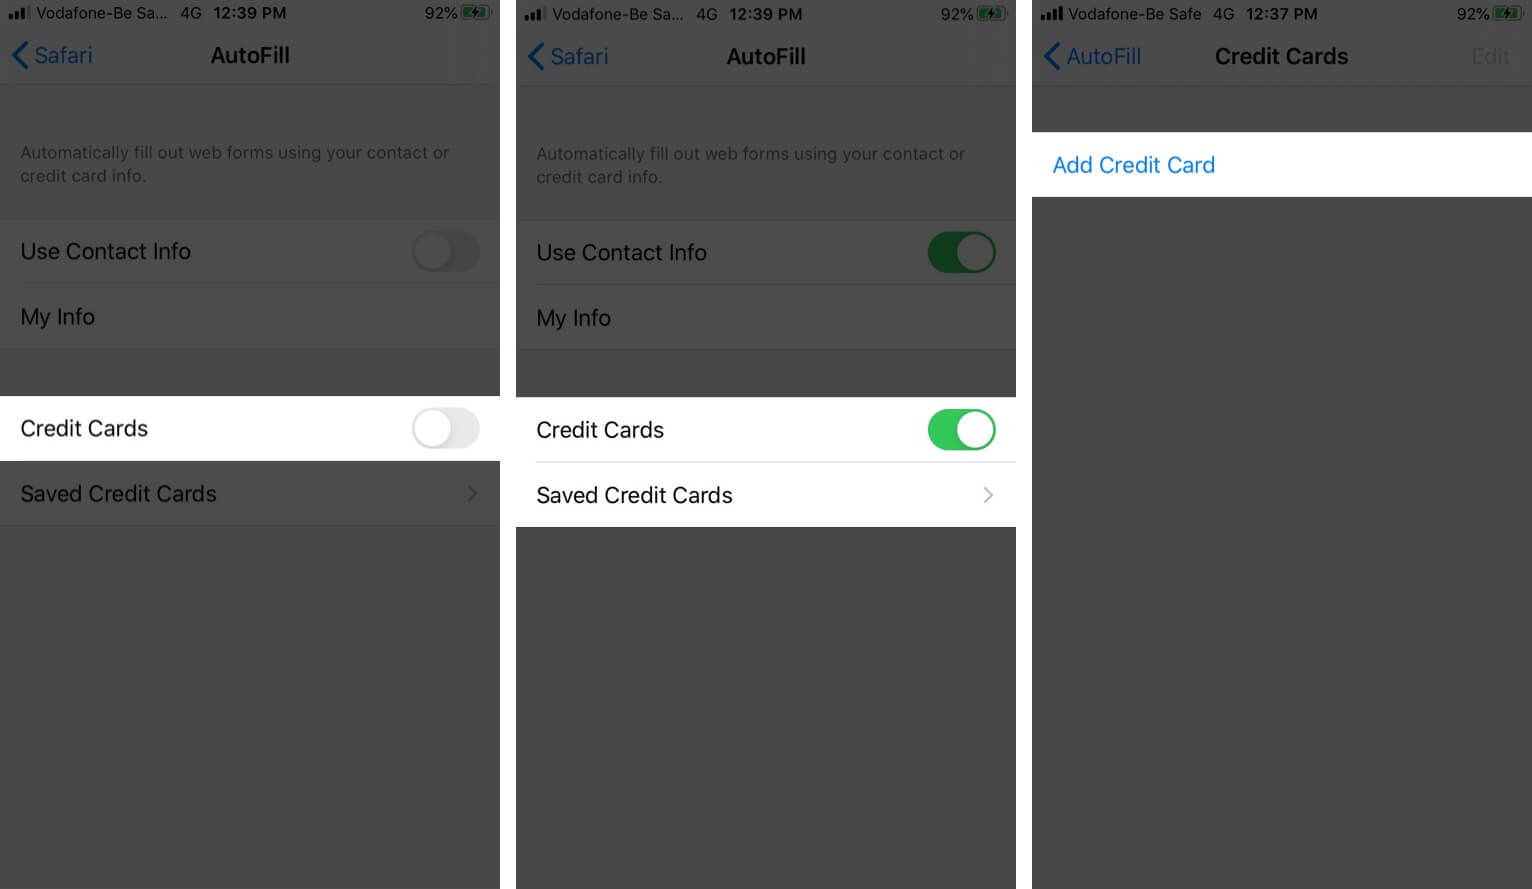 Turn ON Credit Card and Then Tap on Save Credit Cards and Tap on Add Credit Card